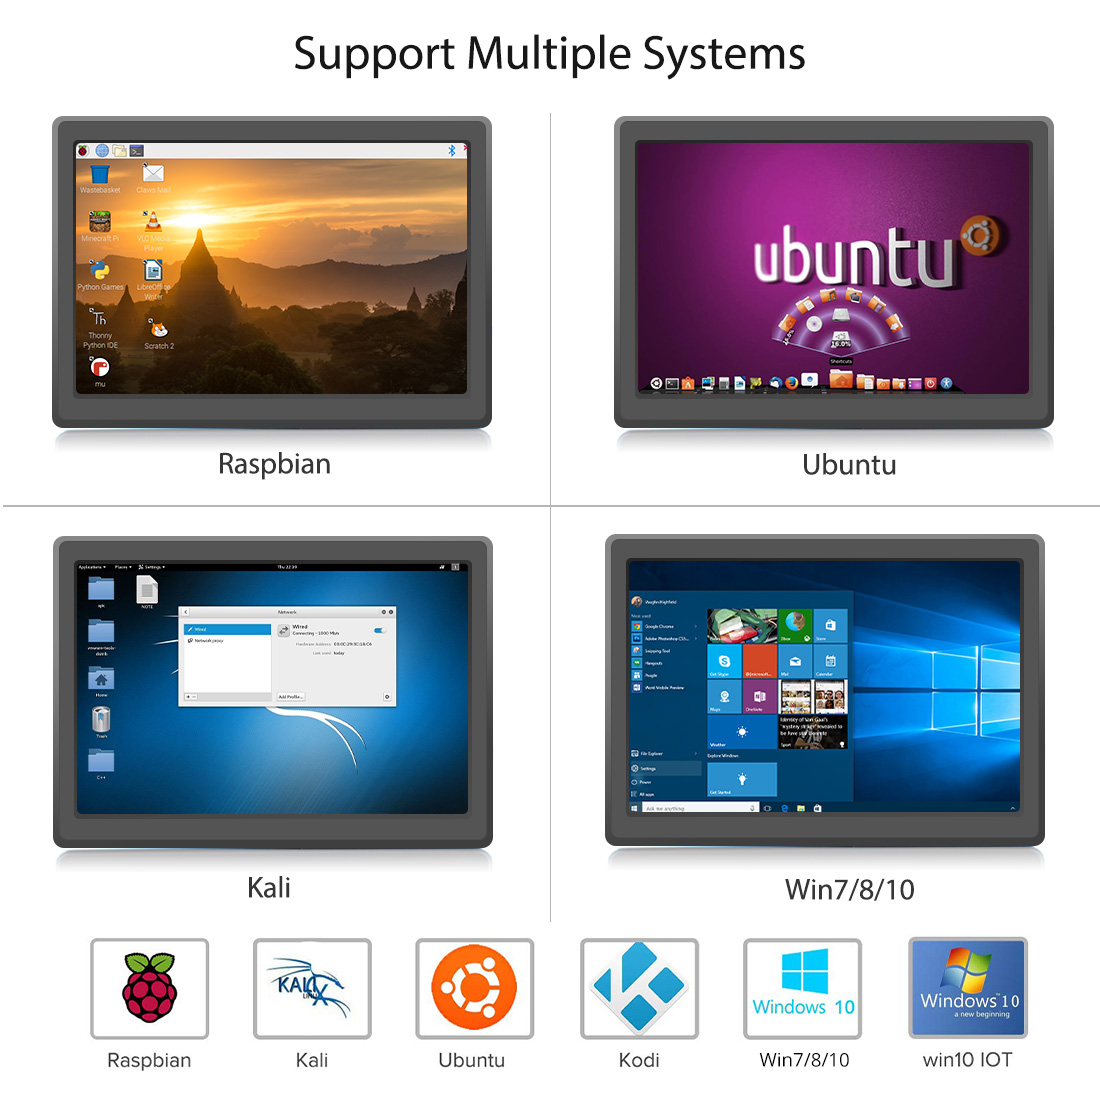 touchscreen monitor support multiple systems